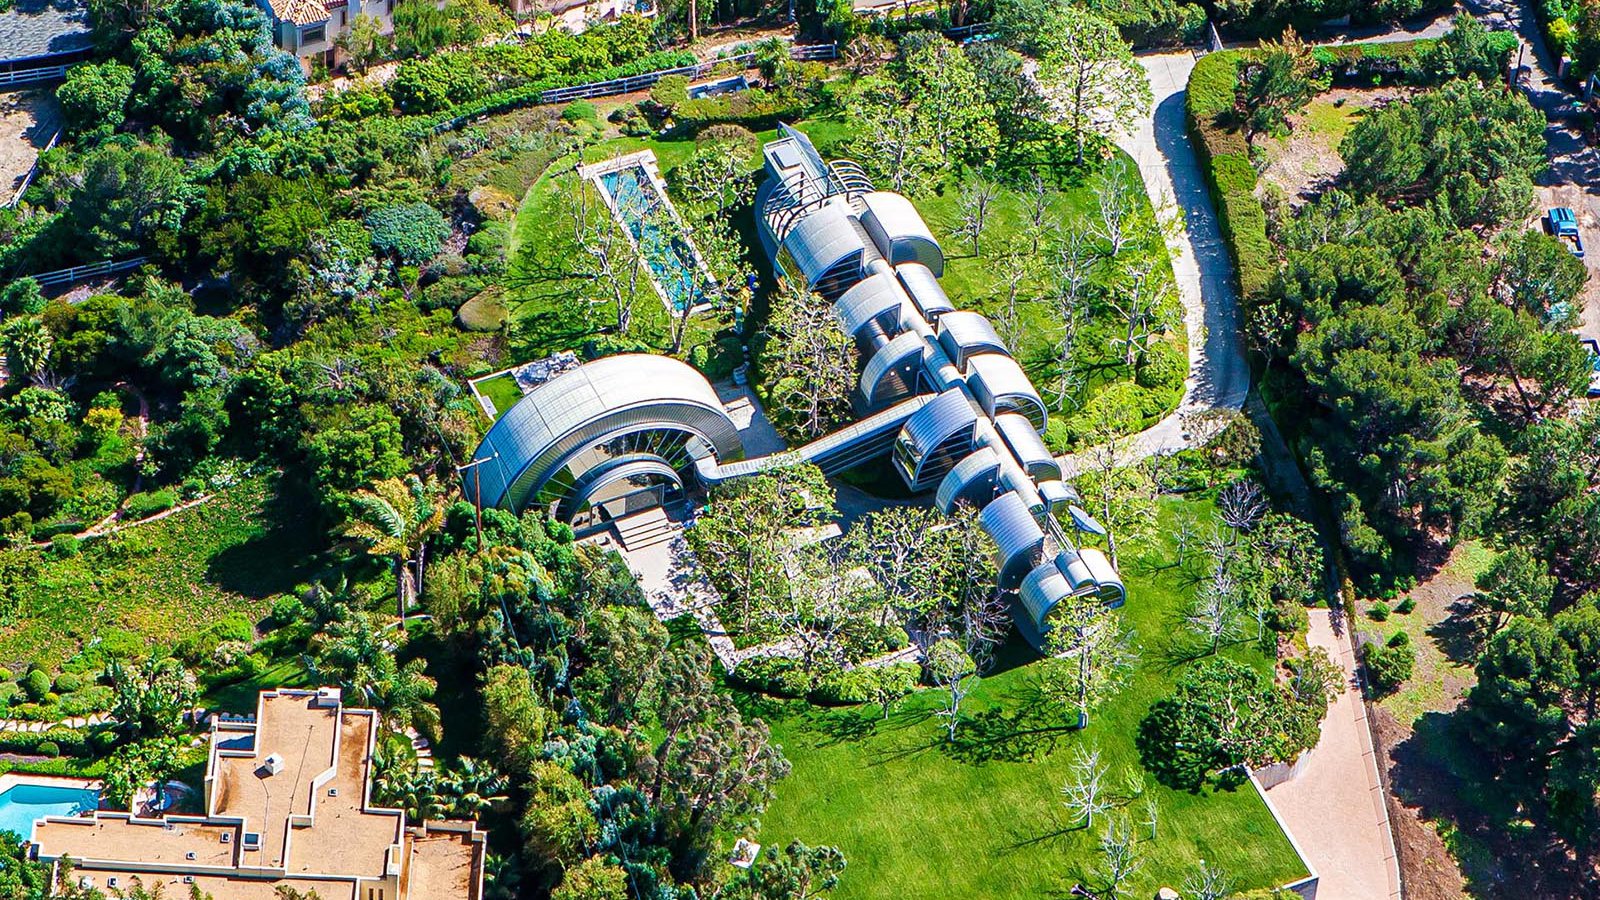 Residential real estate photograph of the unique Spaceship House in Malibu, California